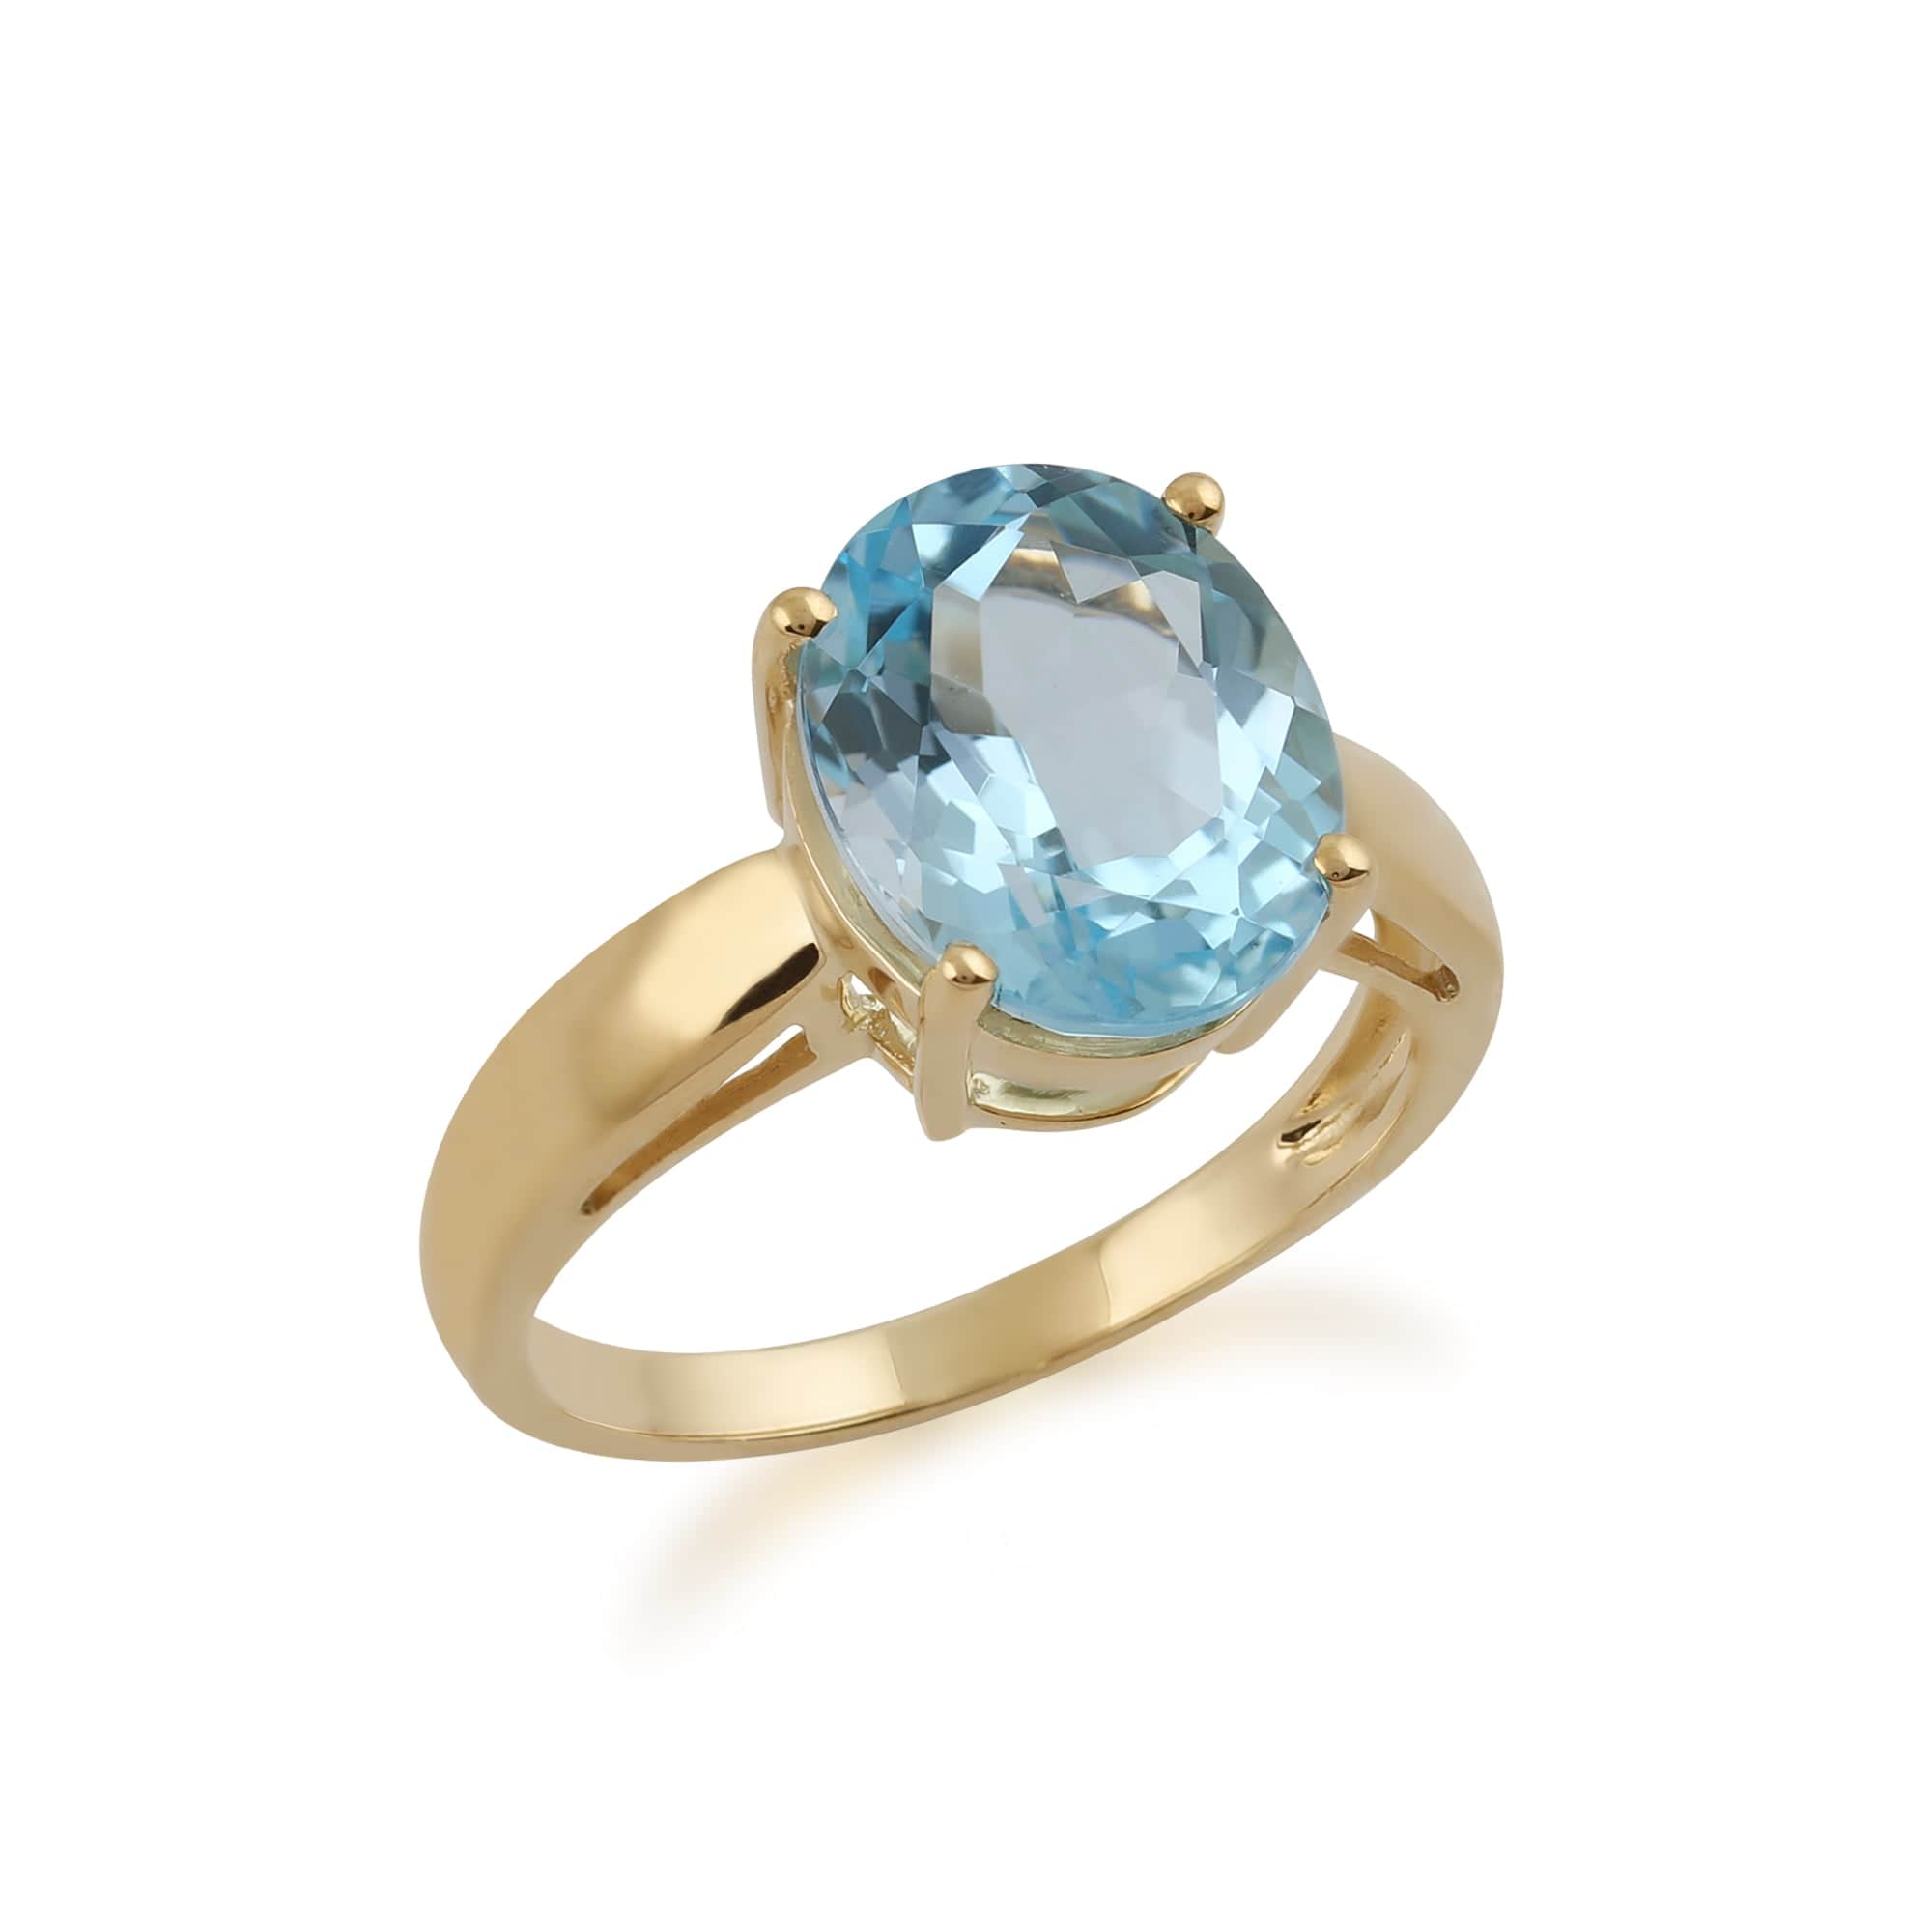 22227 9ct Yellow Gold 5.00ct Sky Blue Topaz Classic Single Stone Ring 2